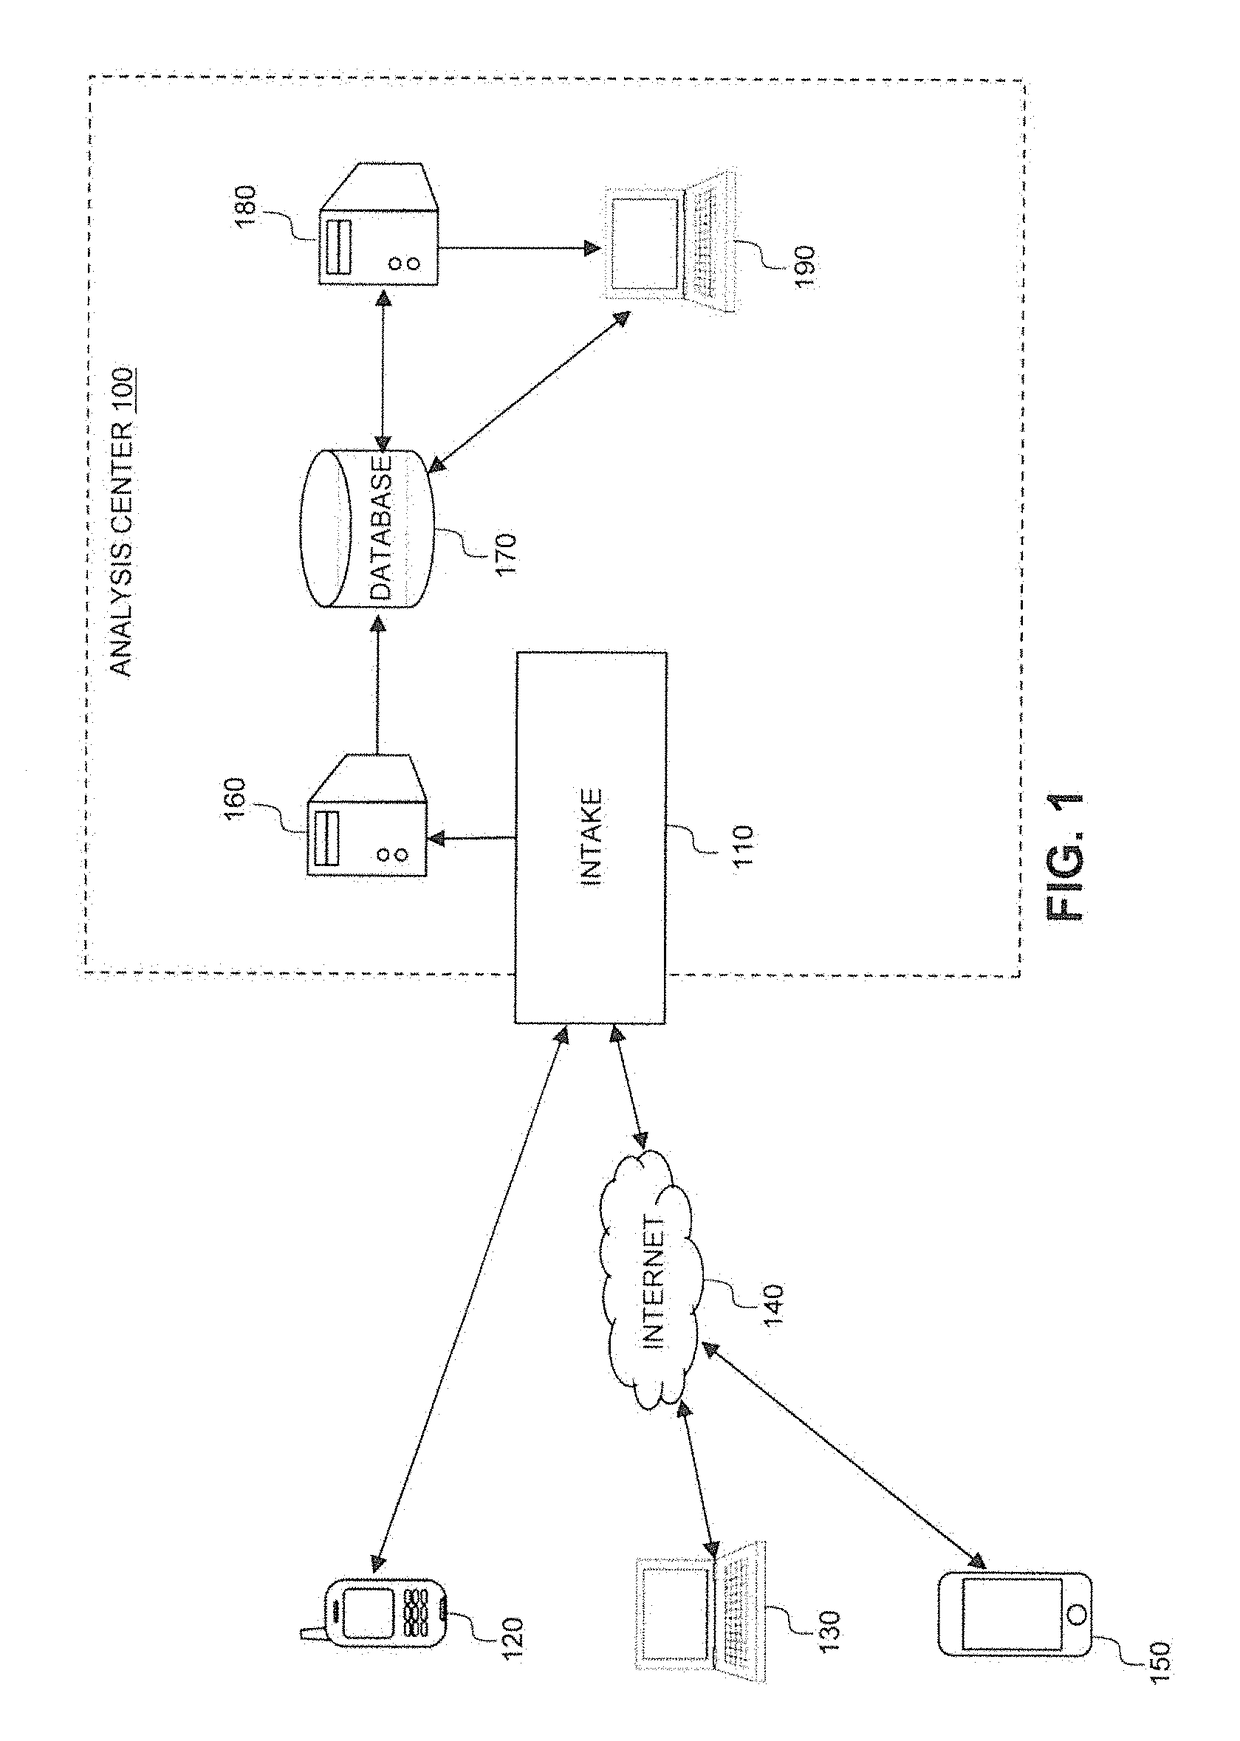 Trend identification and behavioral analytics system and methods